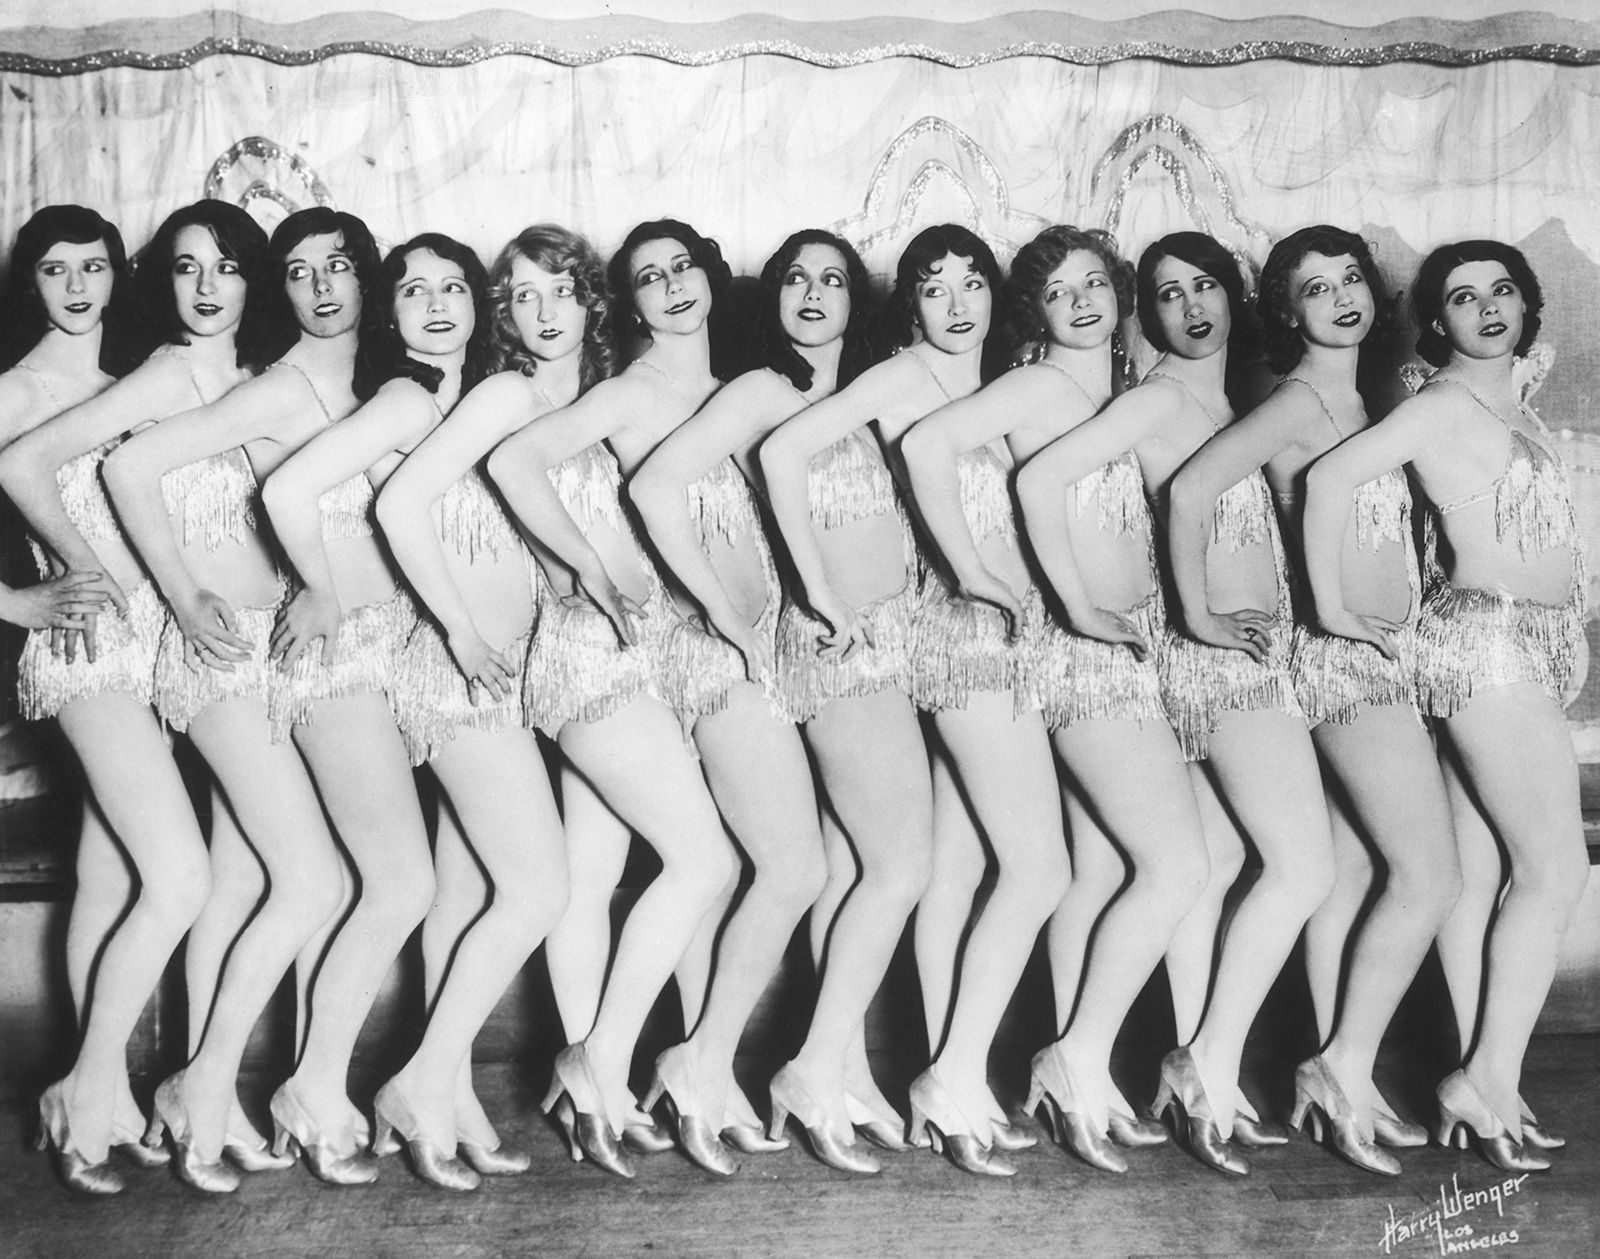 High Heels Through the Years: From the 1920s to Today [PHOTOS